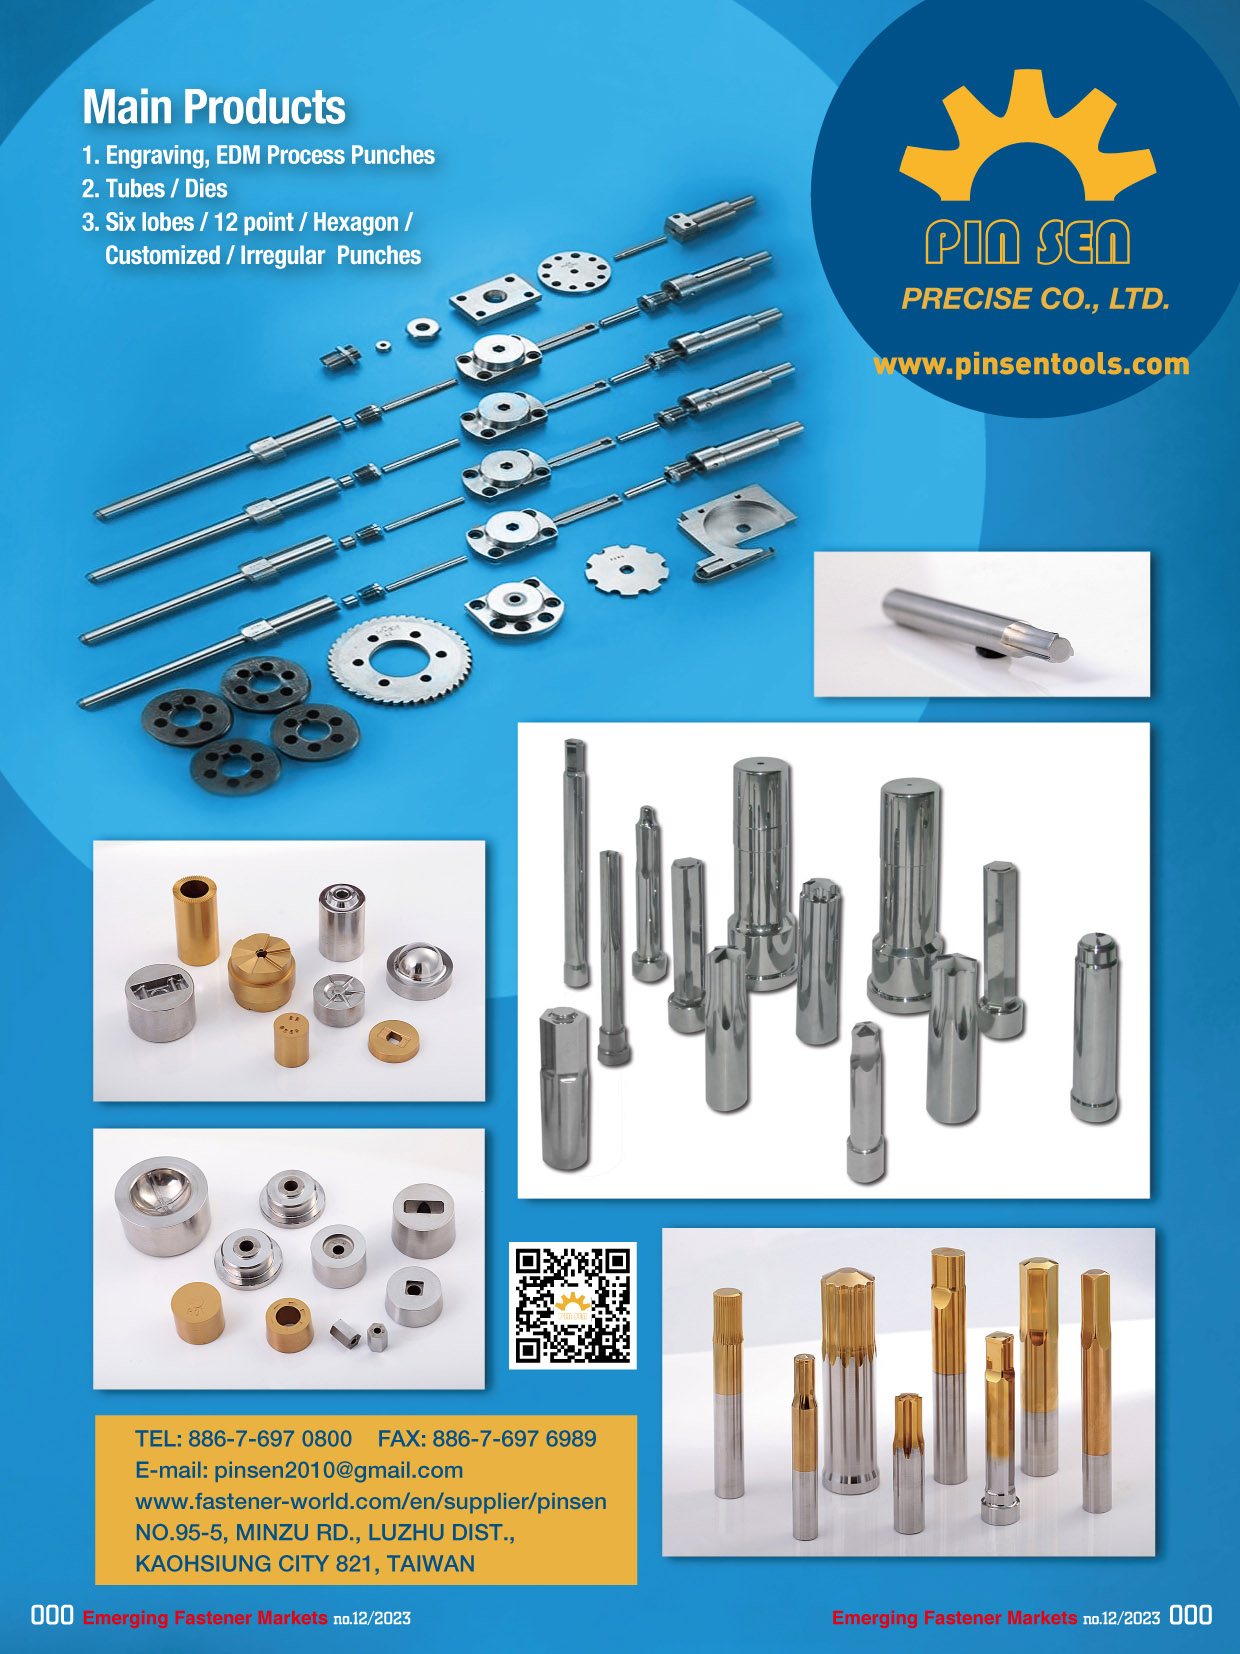 PIN SEN PRECISE CO., LTD. , Engraving, EDM Process Punches, Tubes / Dies, Six Lobes / 12 Point / Hexagon / Customized / Irregular Punches , Punches